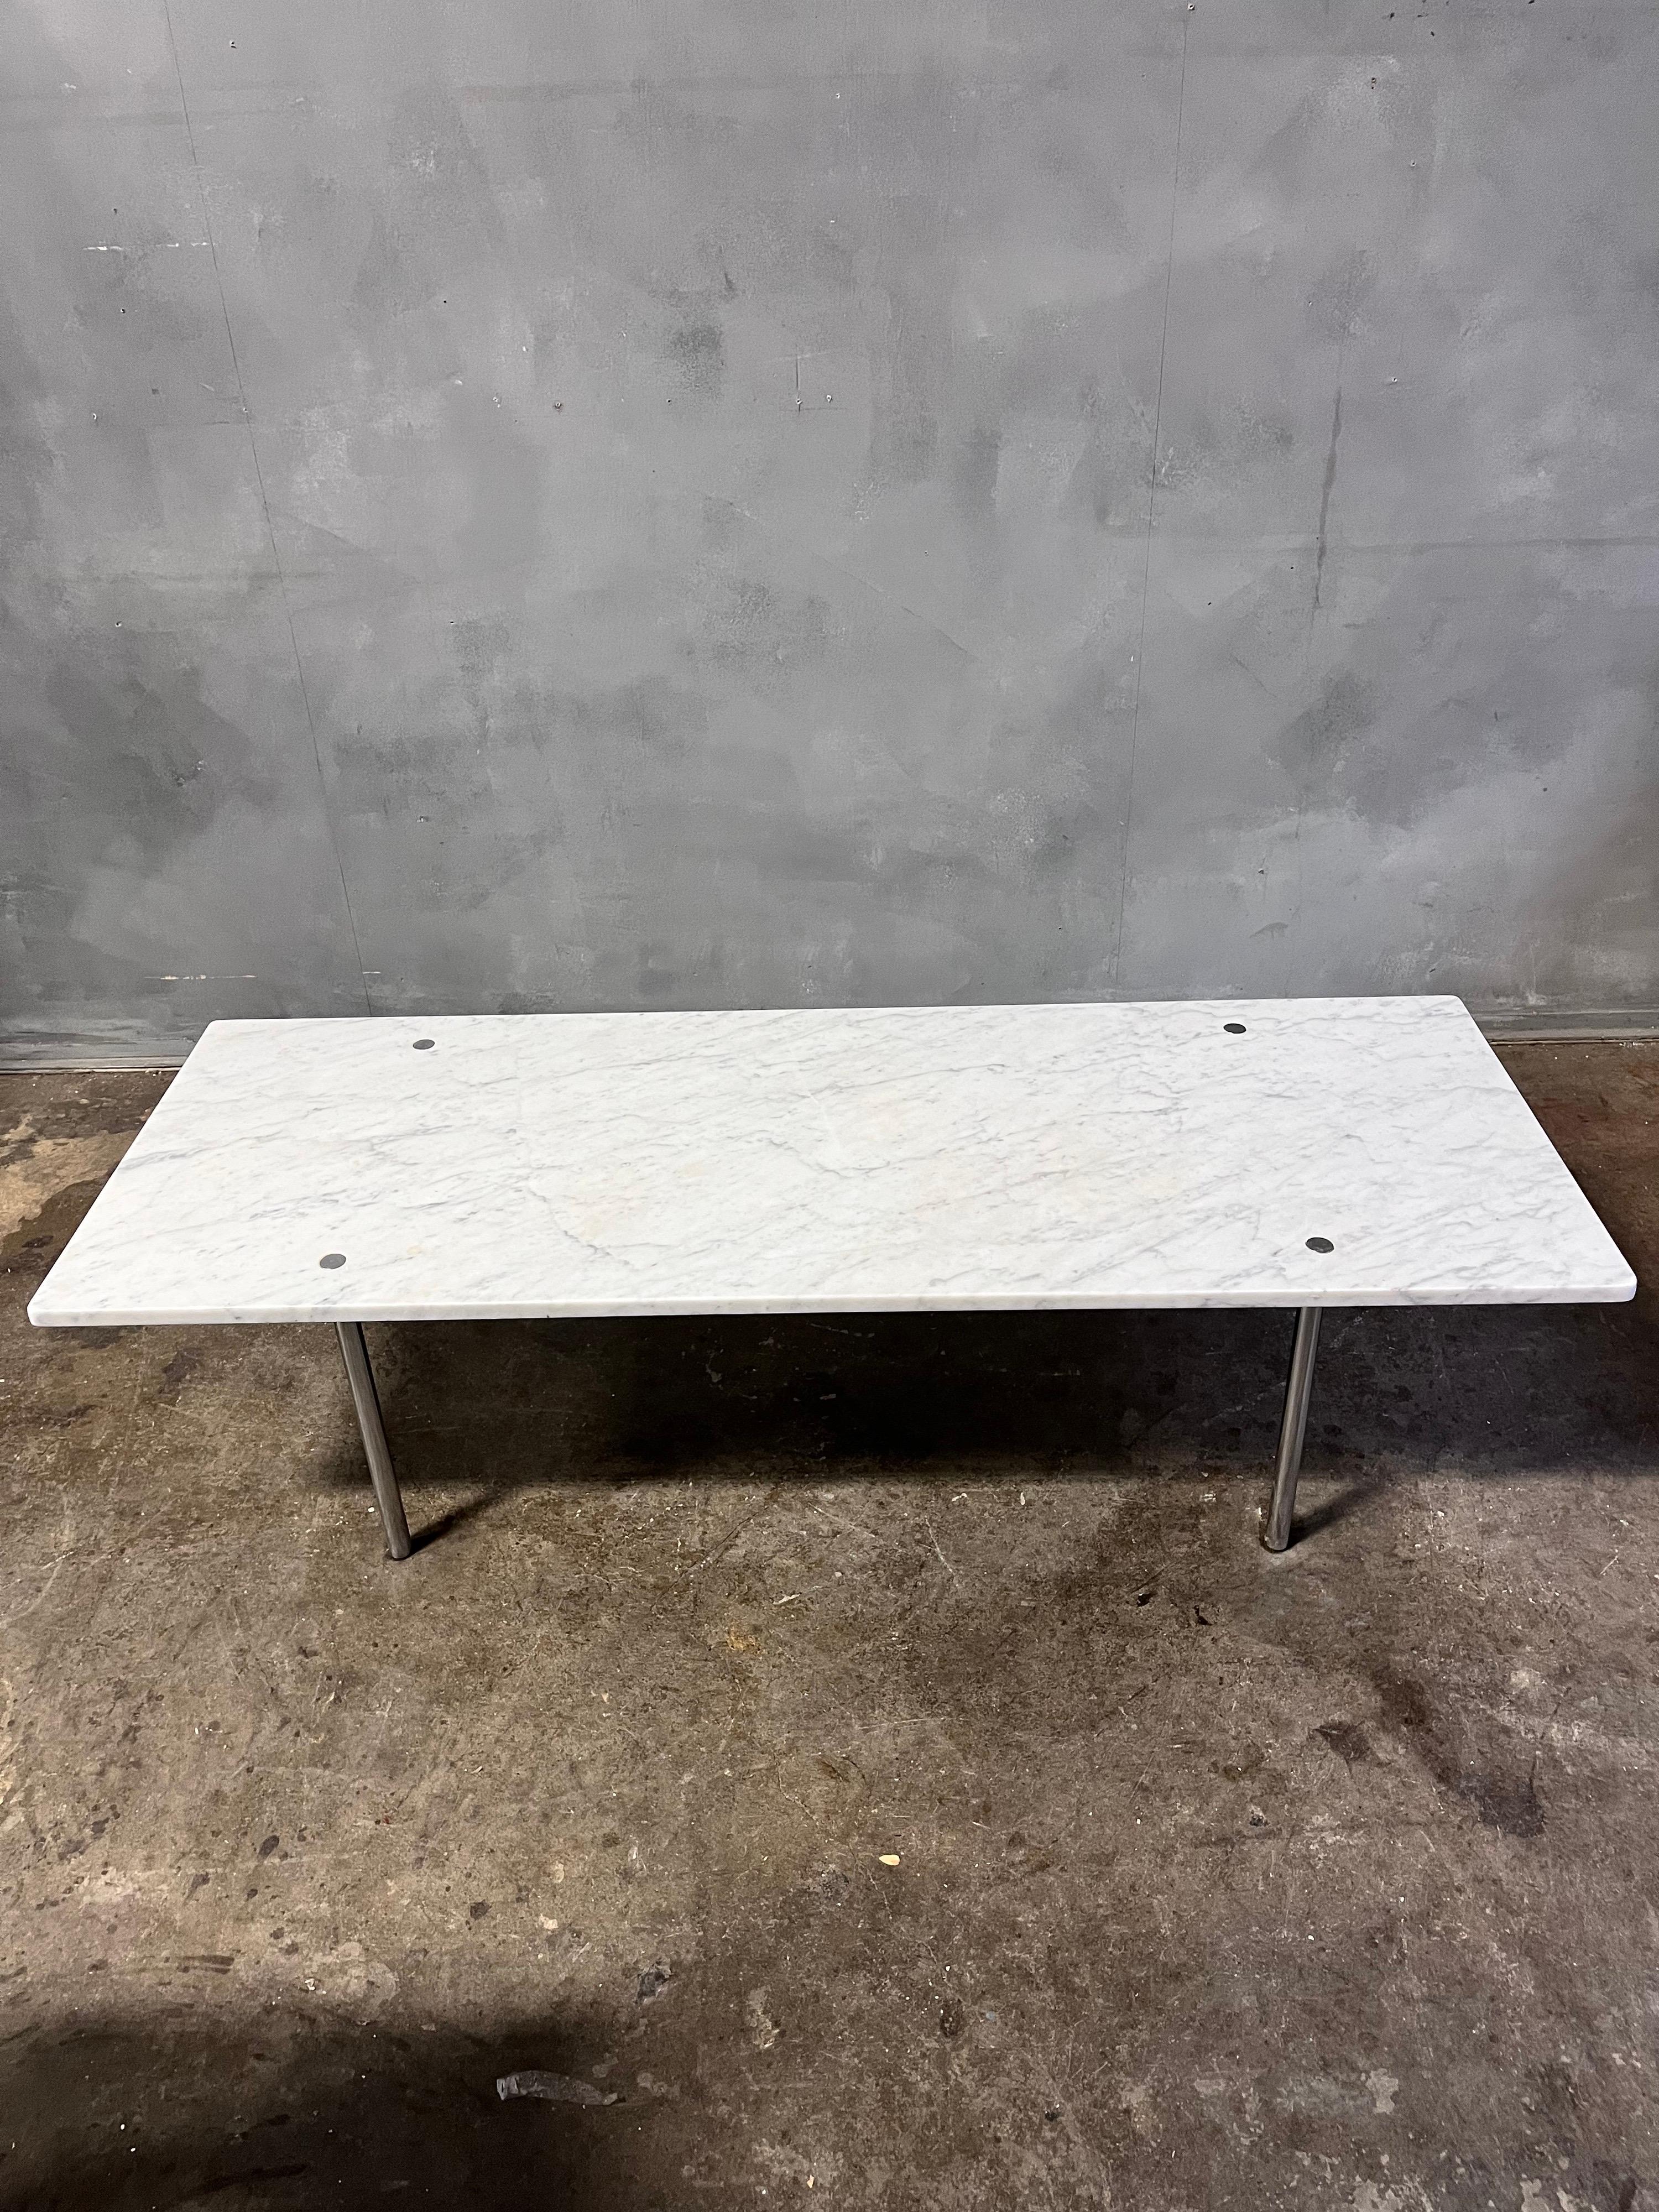 William Katavolos, Ross F. Littell & Douglas Kelley for LaVerne Originals
Coffee table, model 2-M
New York, New York, 1960's
Marble, chrome-plated steel

Marble in good original condition with no chips or cracks, or scrapes. Heavy chromed legs